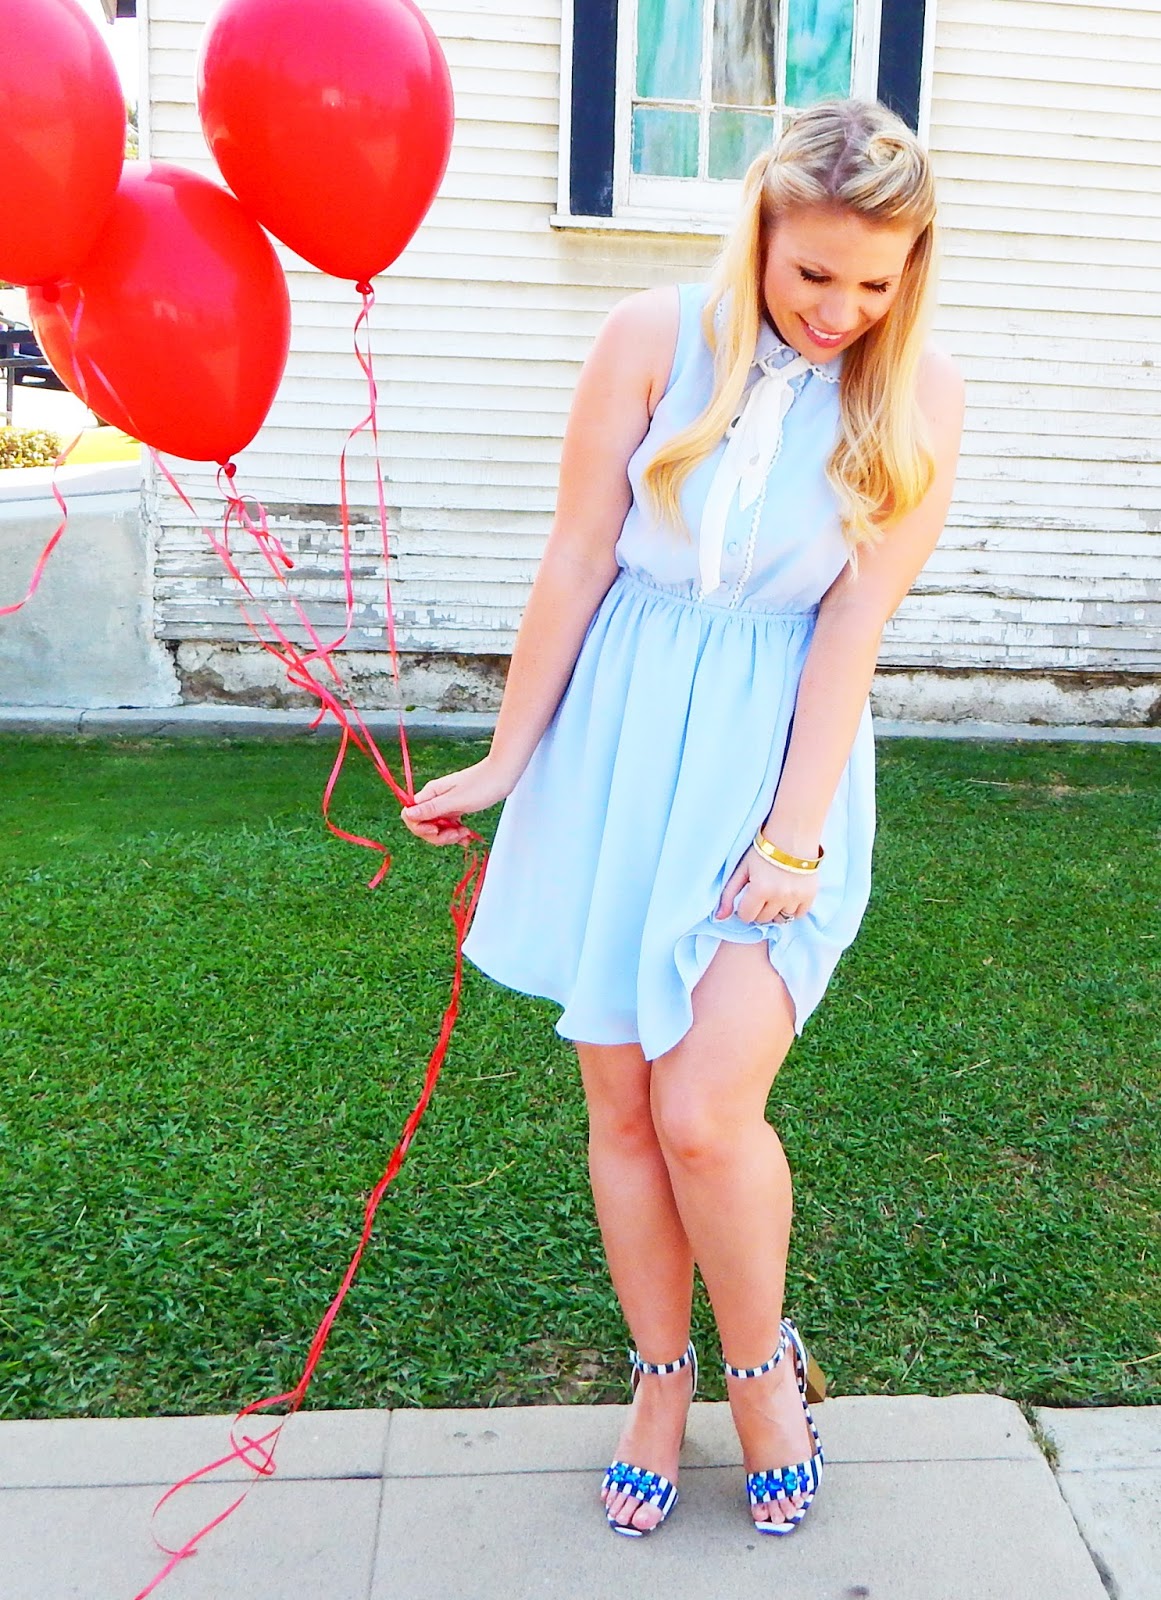 Vintage Sleeveless Dress Outfit